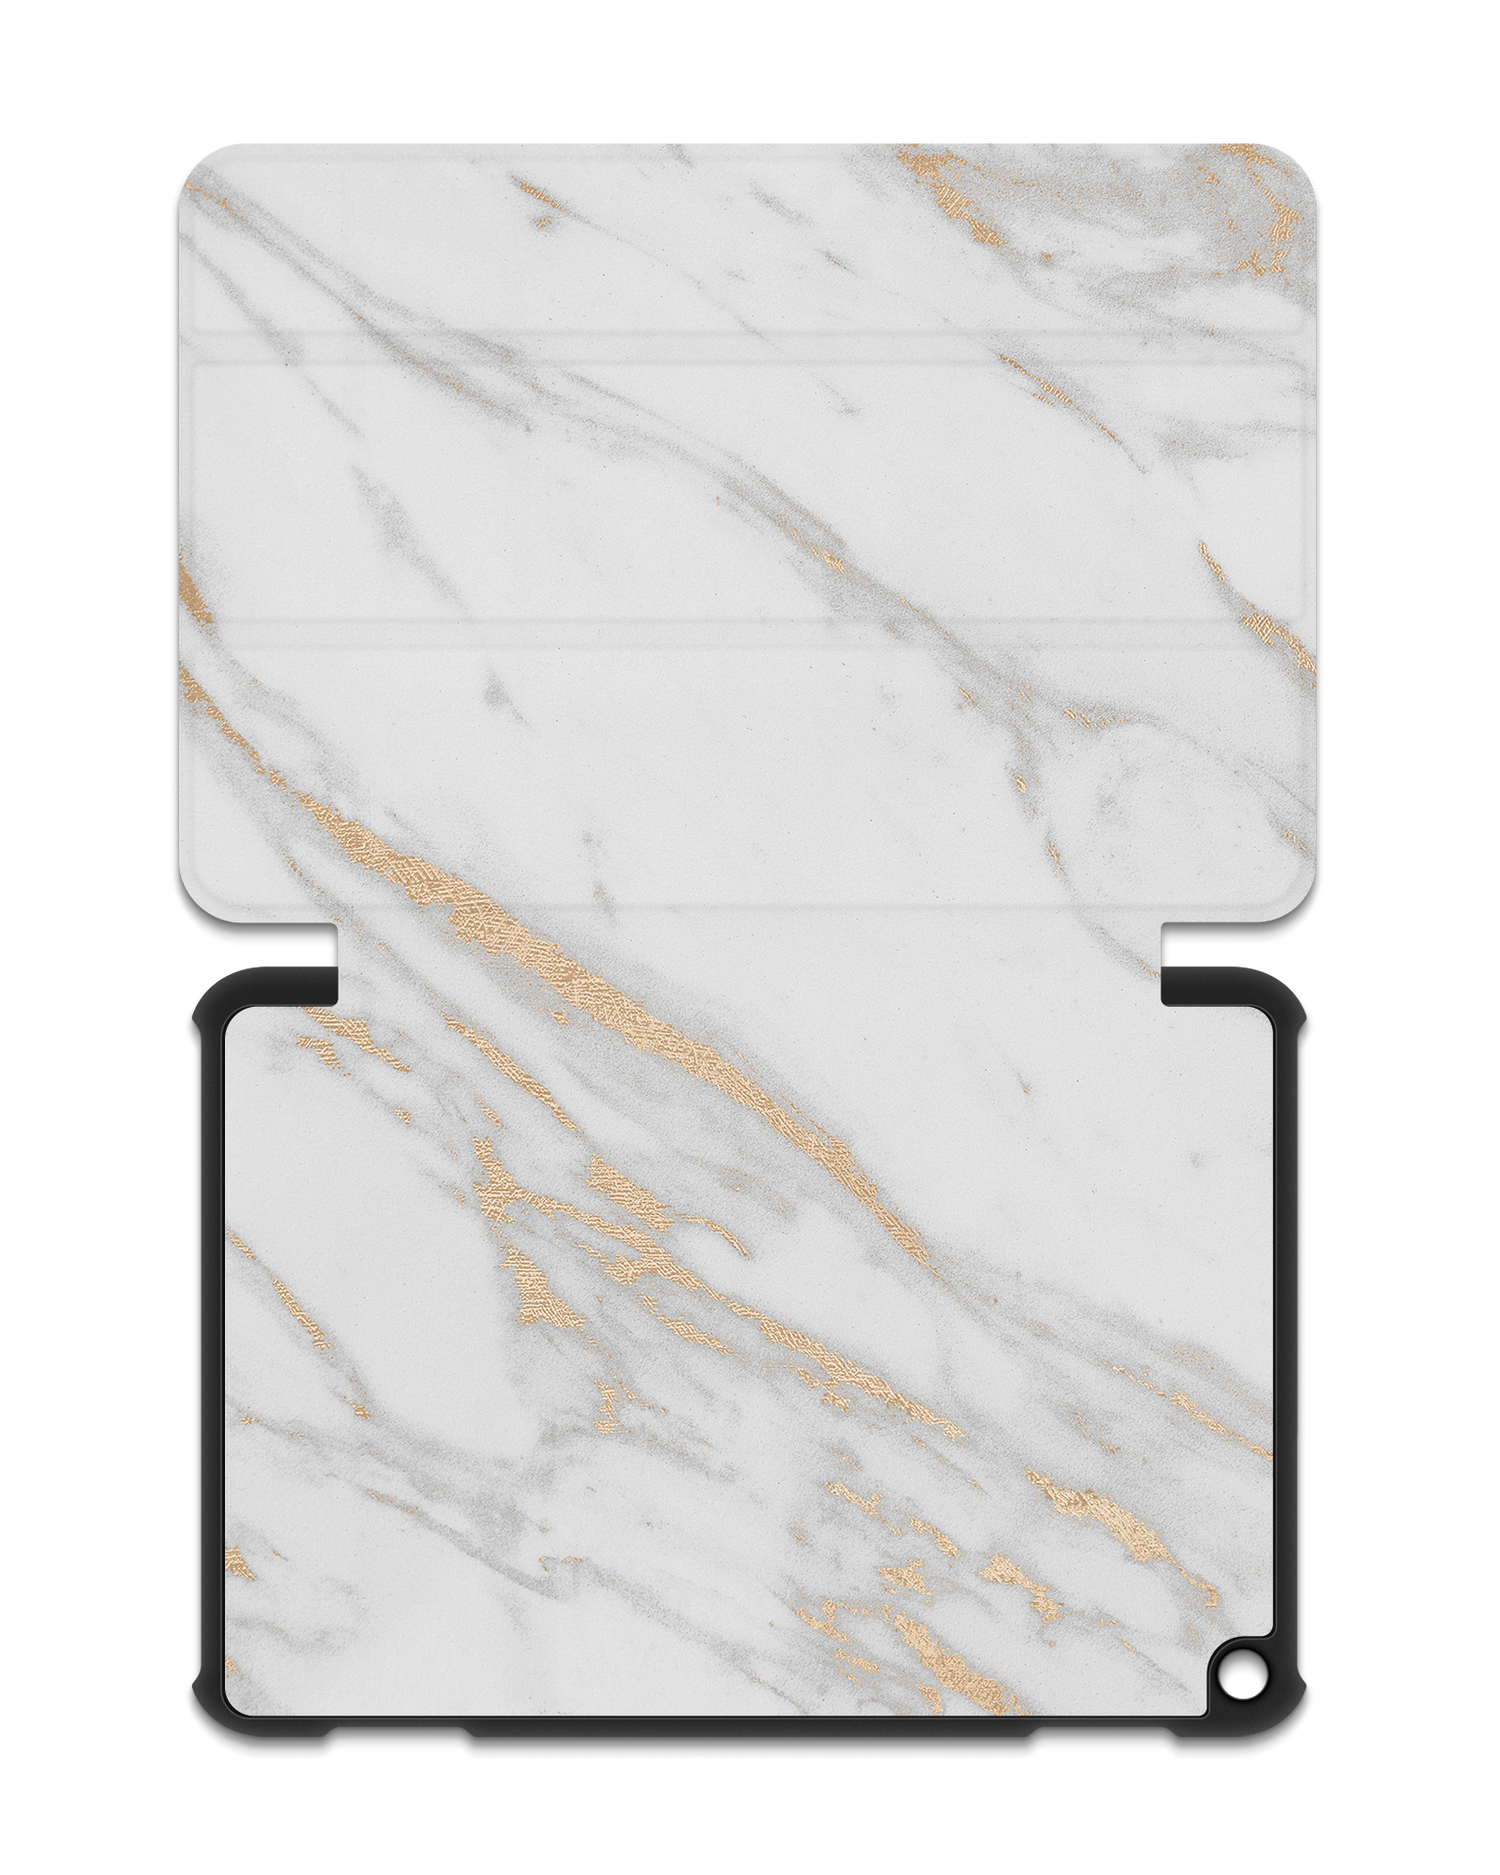 Gold Marble Elegance Tablet Smart Case for Amazon Fire HD 8 (2022), Amazon Fire HD 8 Plus (2022), Amazon Fire HD 8 (2020), Amazon Fire HD 8 Plus (2020): Opened